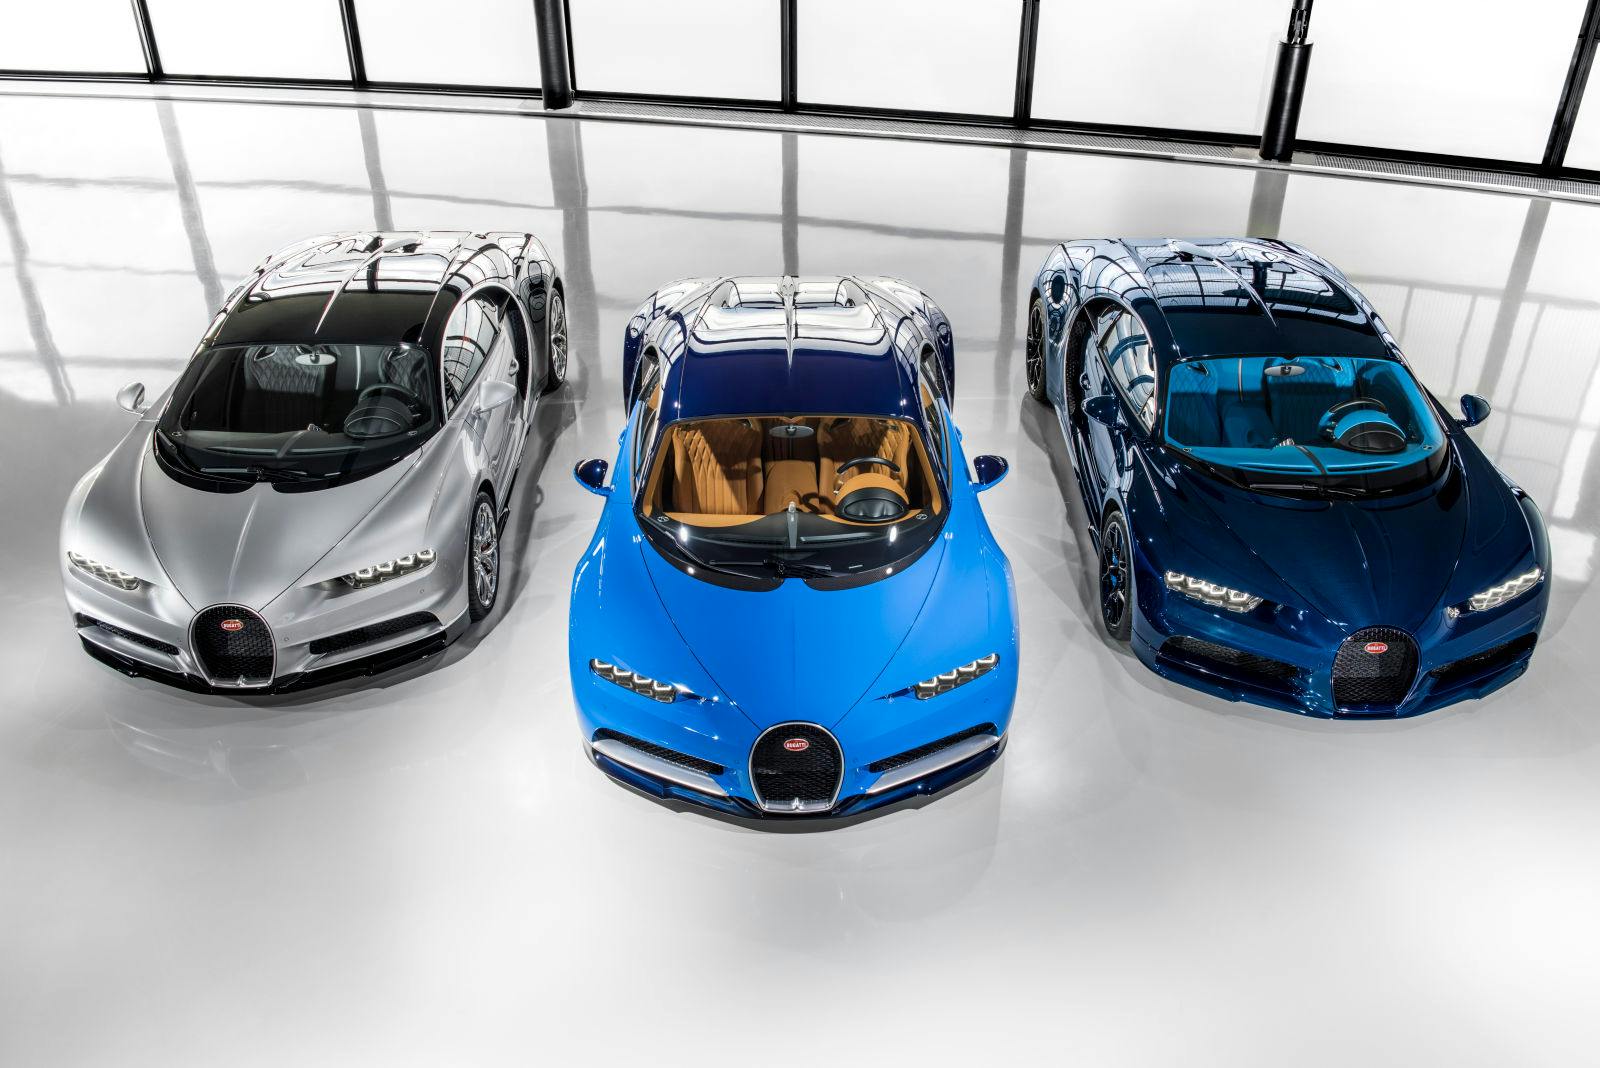 In March 2017, the first three Chiron customer cars leave the Atelier in Molsheim, France.